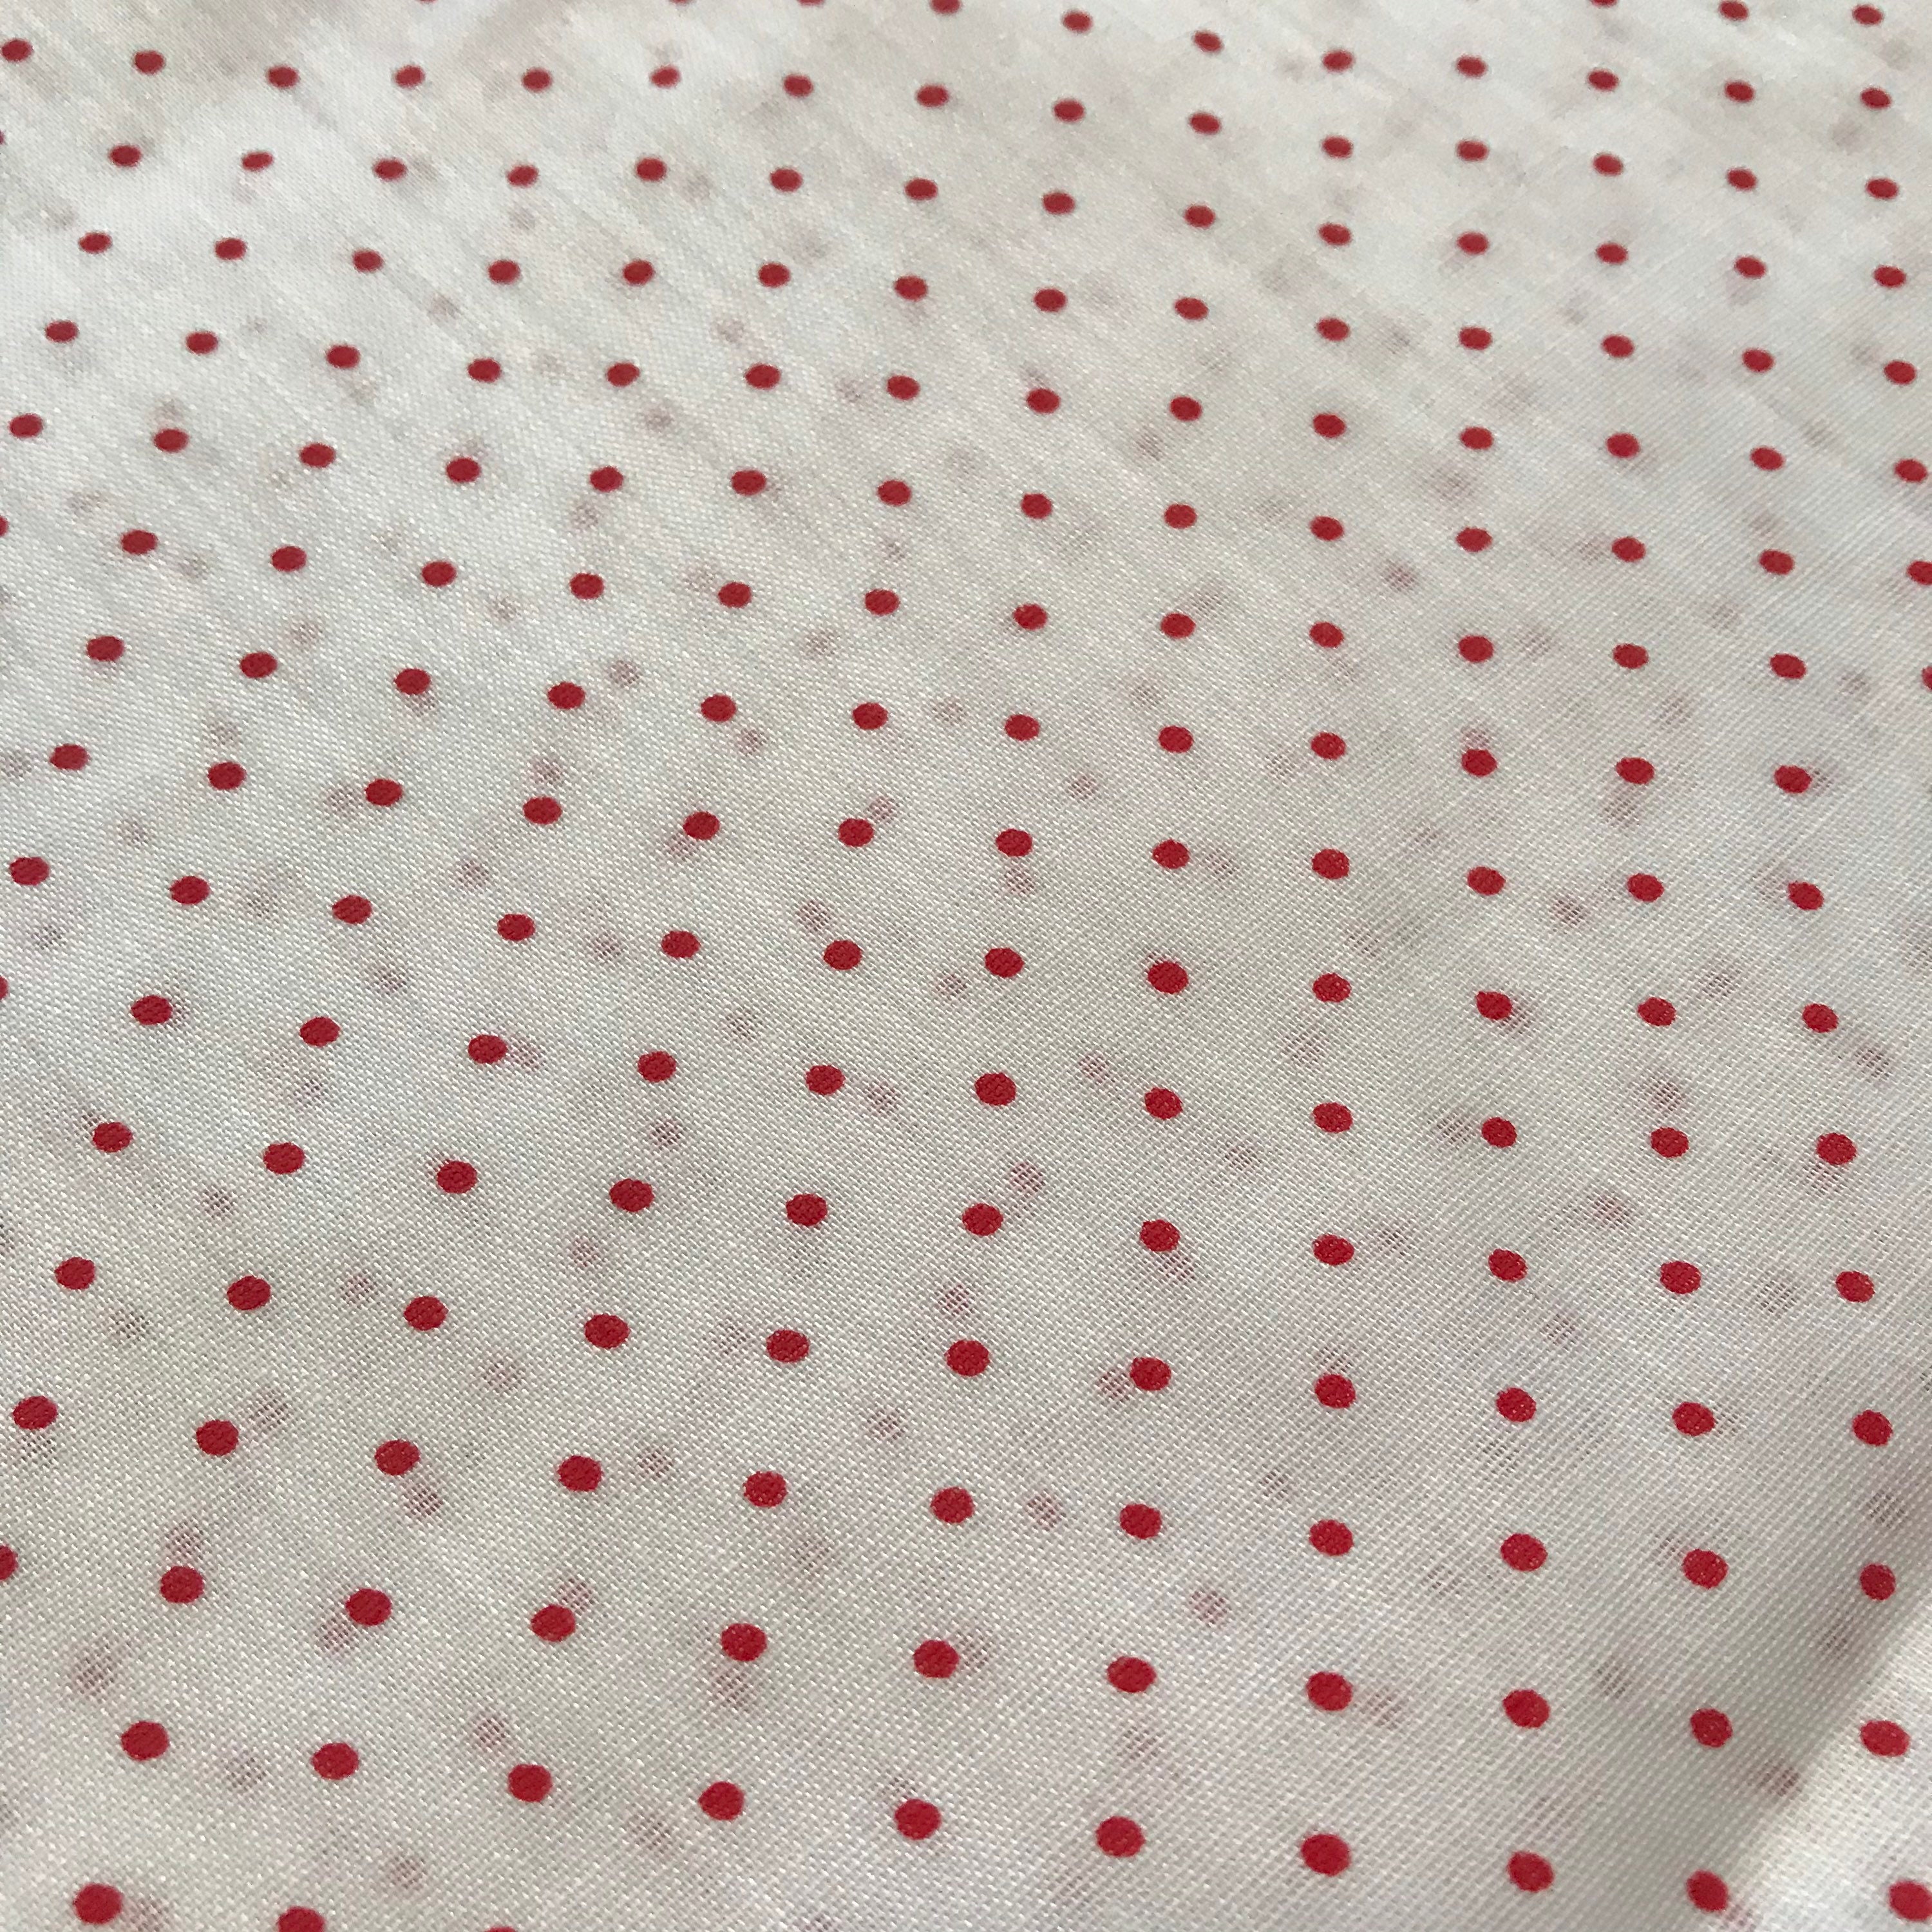 Red Pin Dot Cotton Fabric White Background by the Yard - Etsy